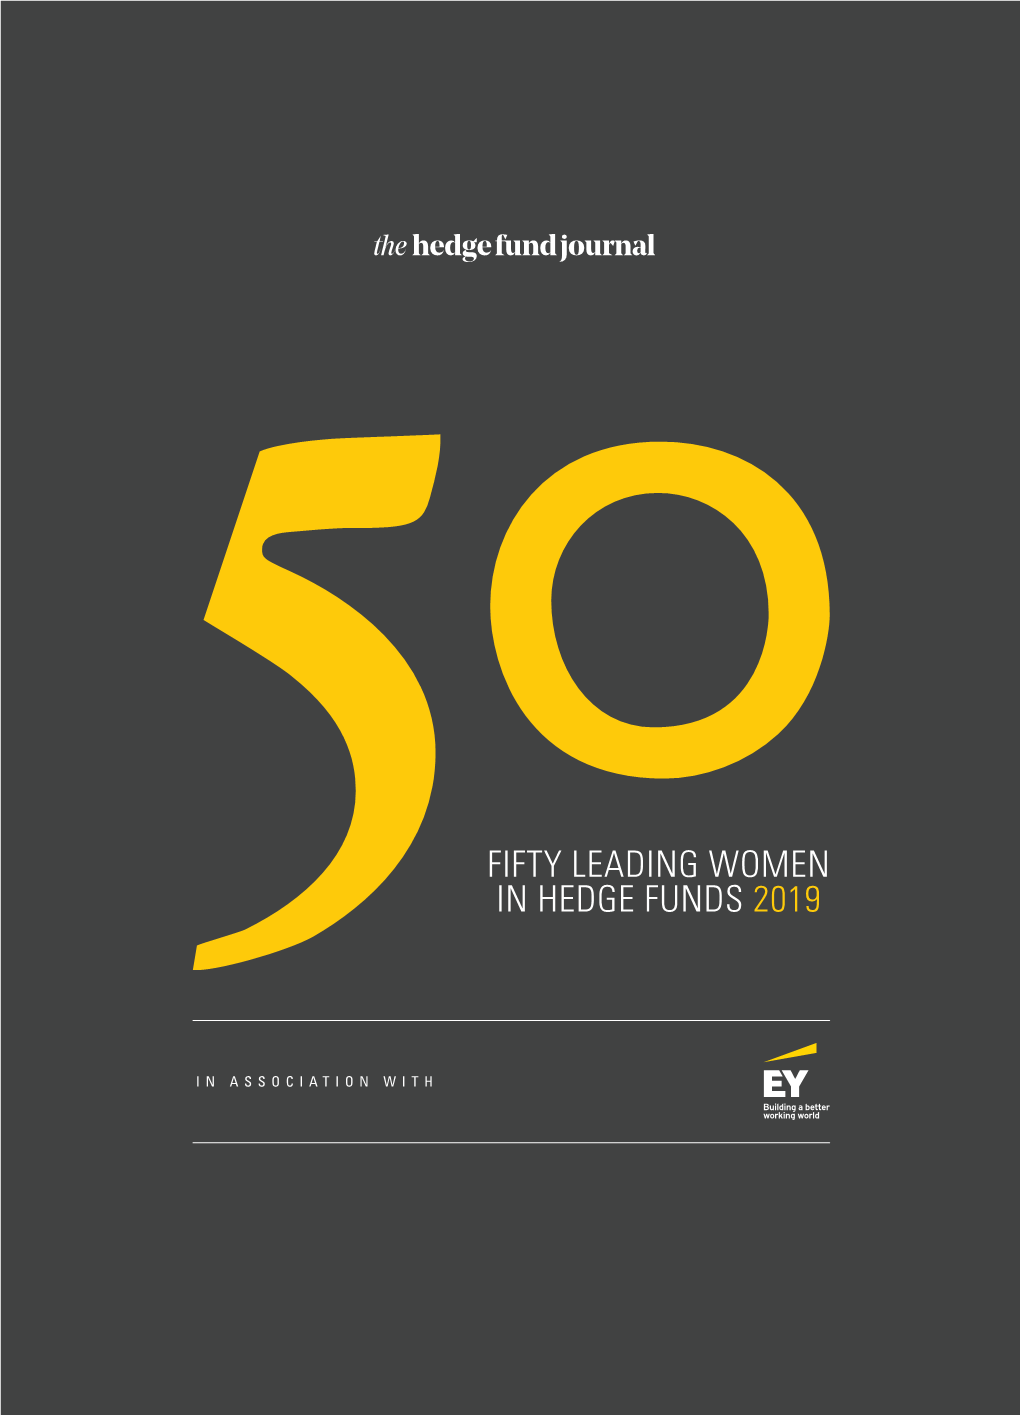 Fifty Leading Women in Hedge Funds 2019